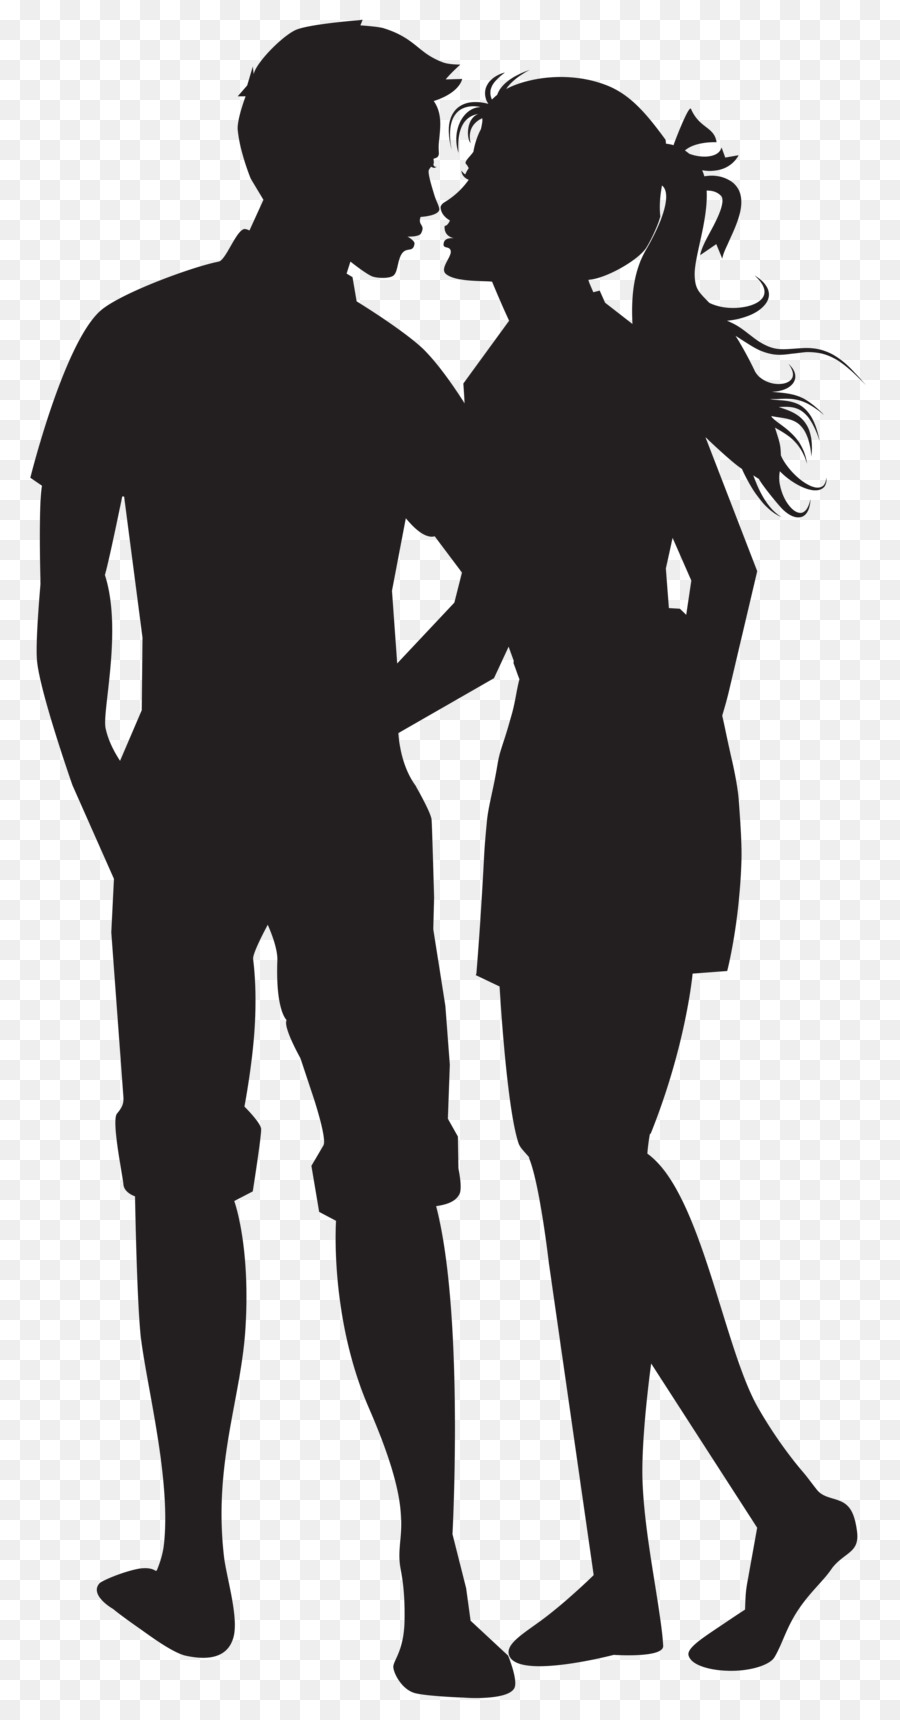 Portable Network Graphics Clip Art Couples Image Vector graphics - silhouette png download - 4194*8000 - Free Transparent Clip Art Couples png Download.